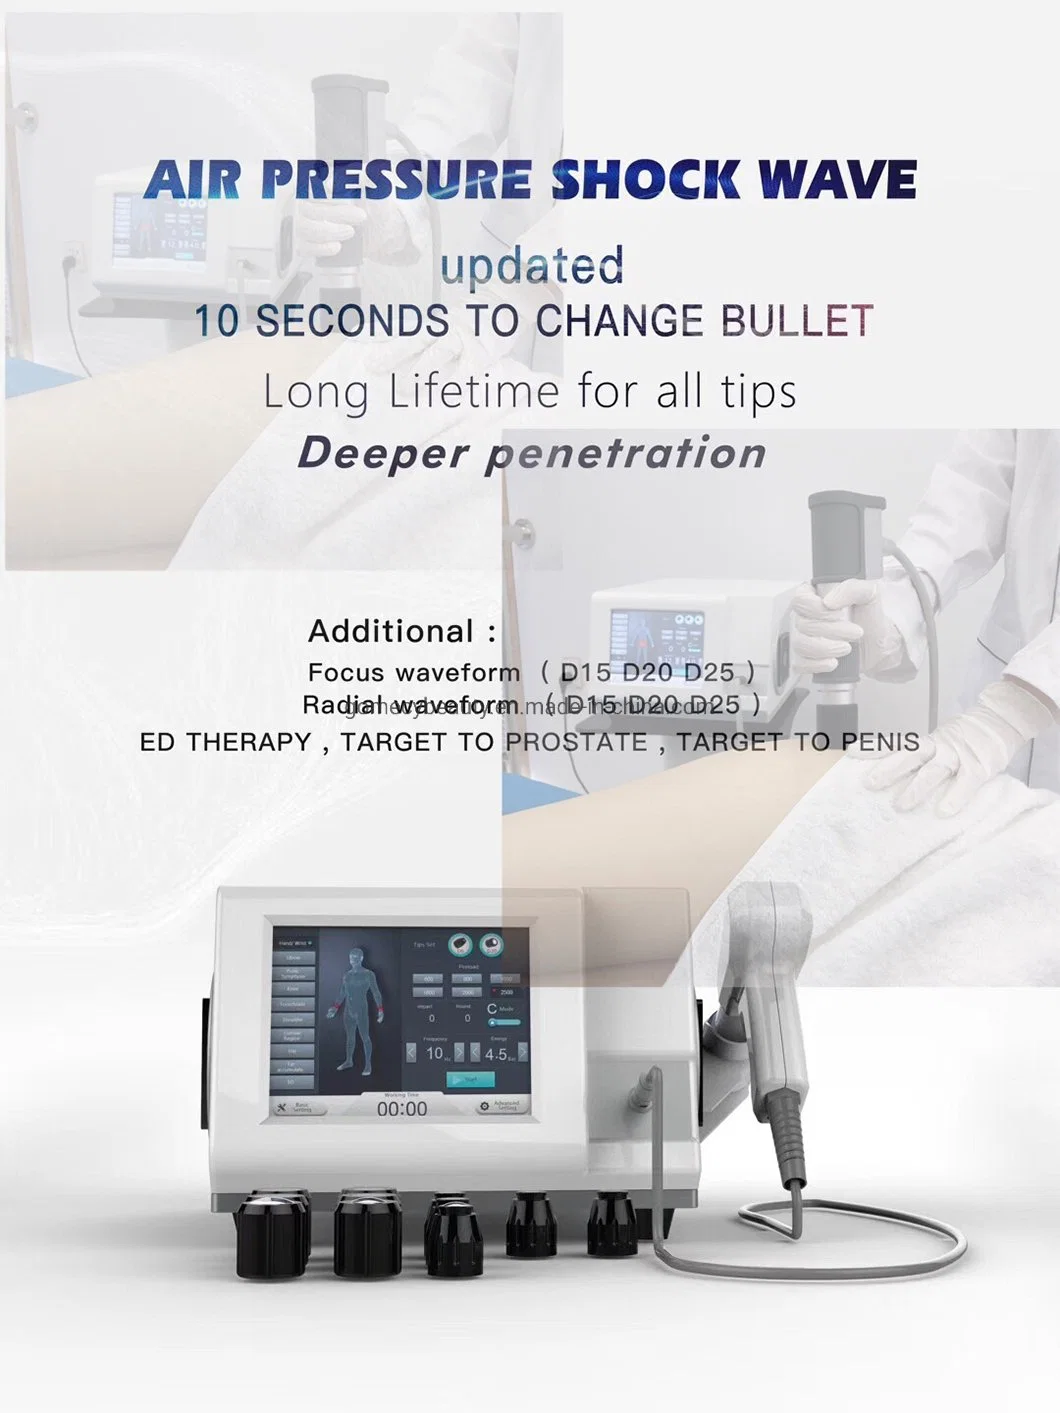 Hot Sale Portable Pneumatic Ballistic Shock Wave Shockwave Therapy Machine Extracorporal Shock Wave Therapy Equipment Eswt Physical Rehabilitation